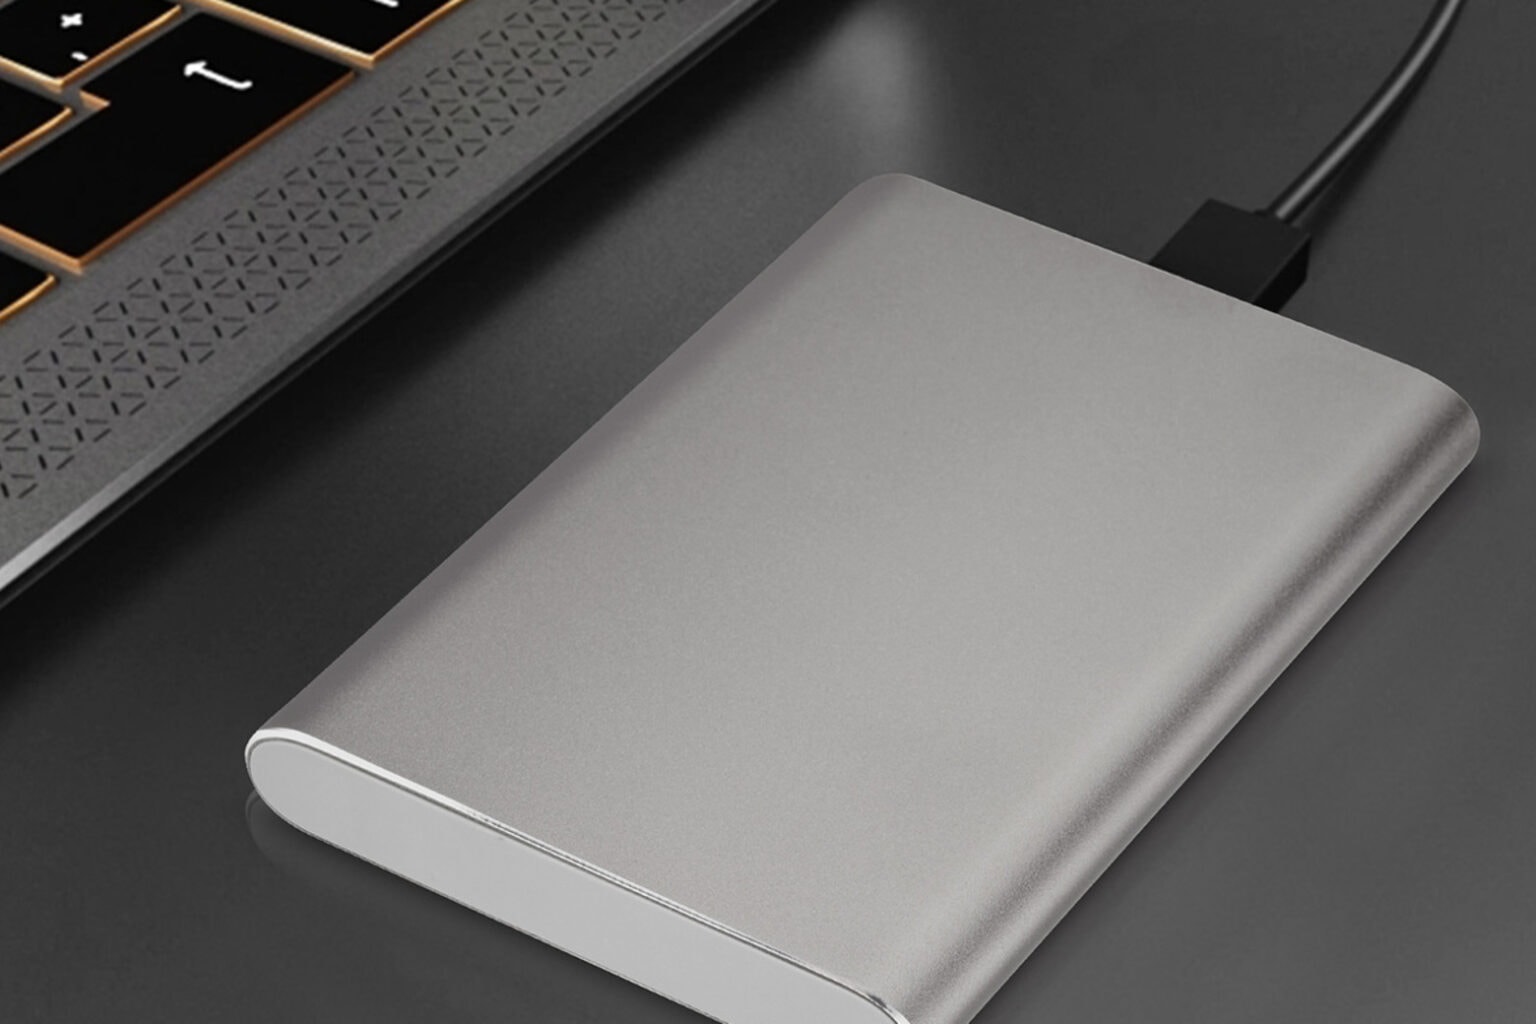 Backup your photos and videos with this 1TB external hard drive, now $50.